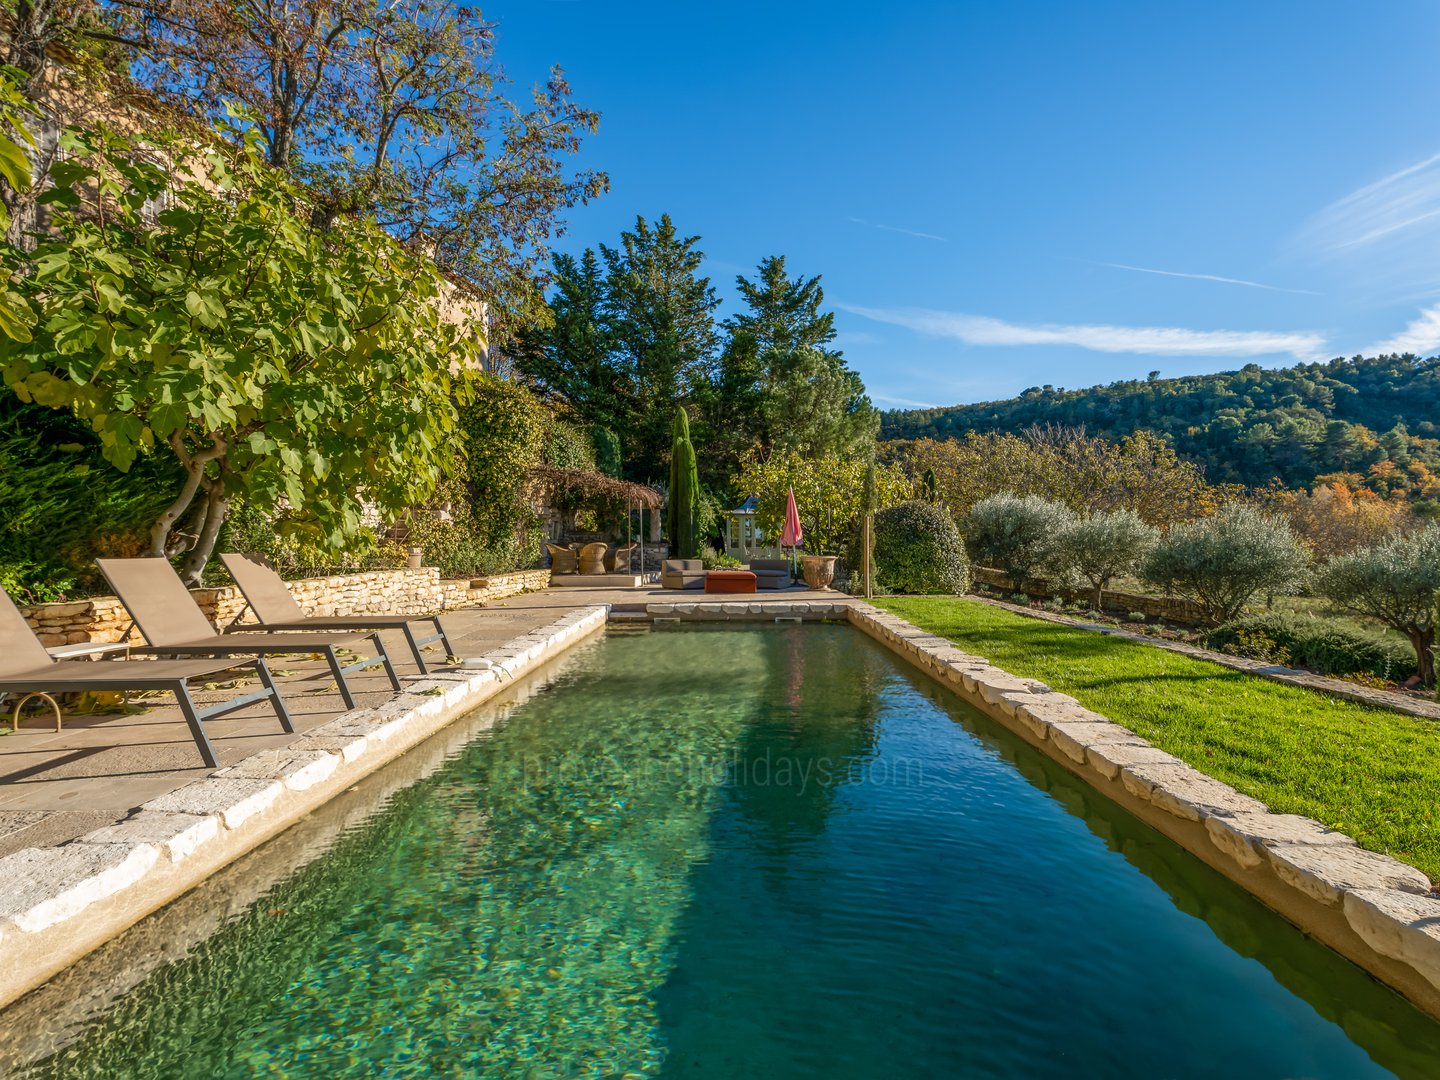 18th century Bastide with views of Luberon for sale - Bonnieux - 2